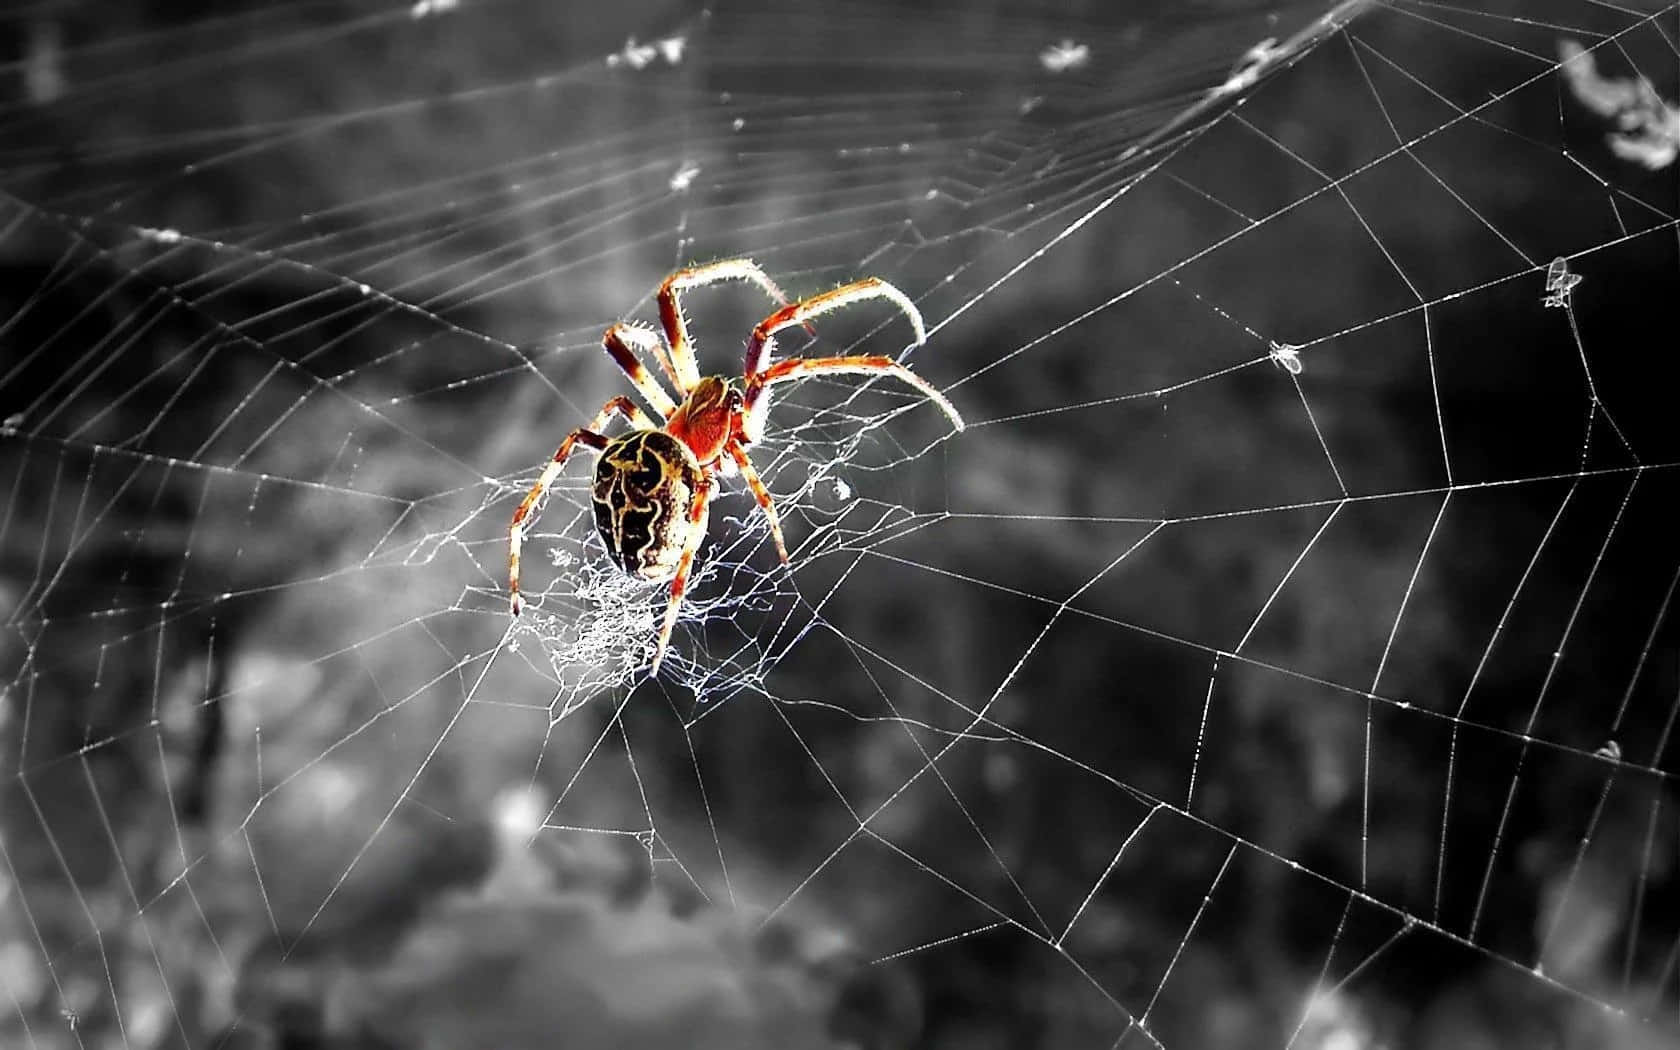 A beautiful spider perched atop a web.